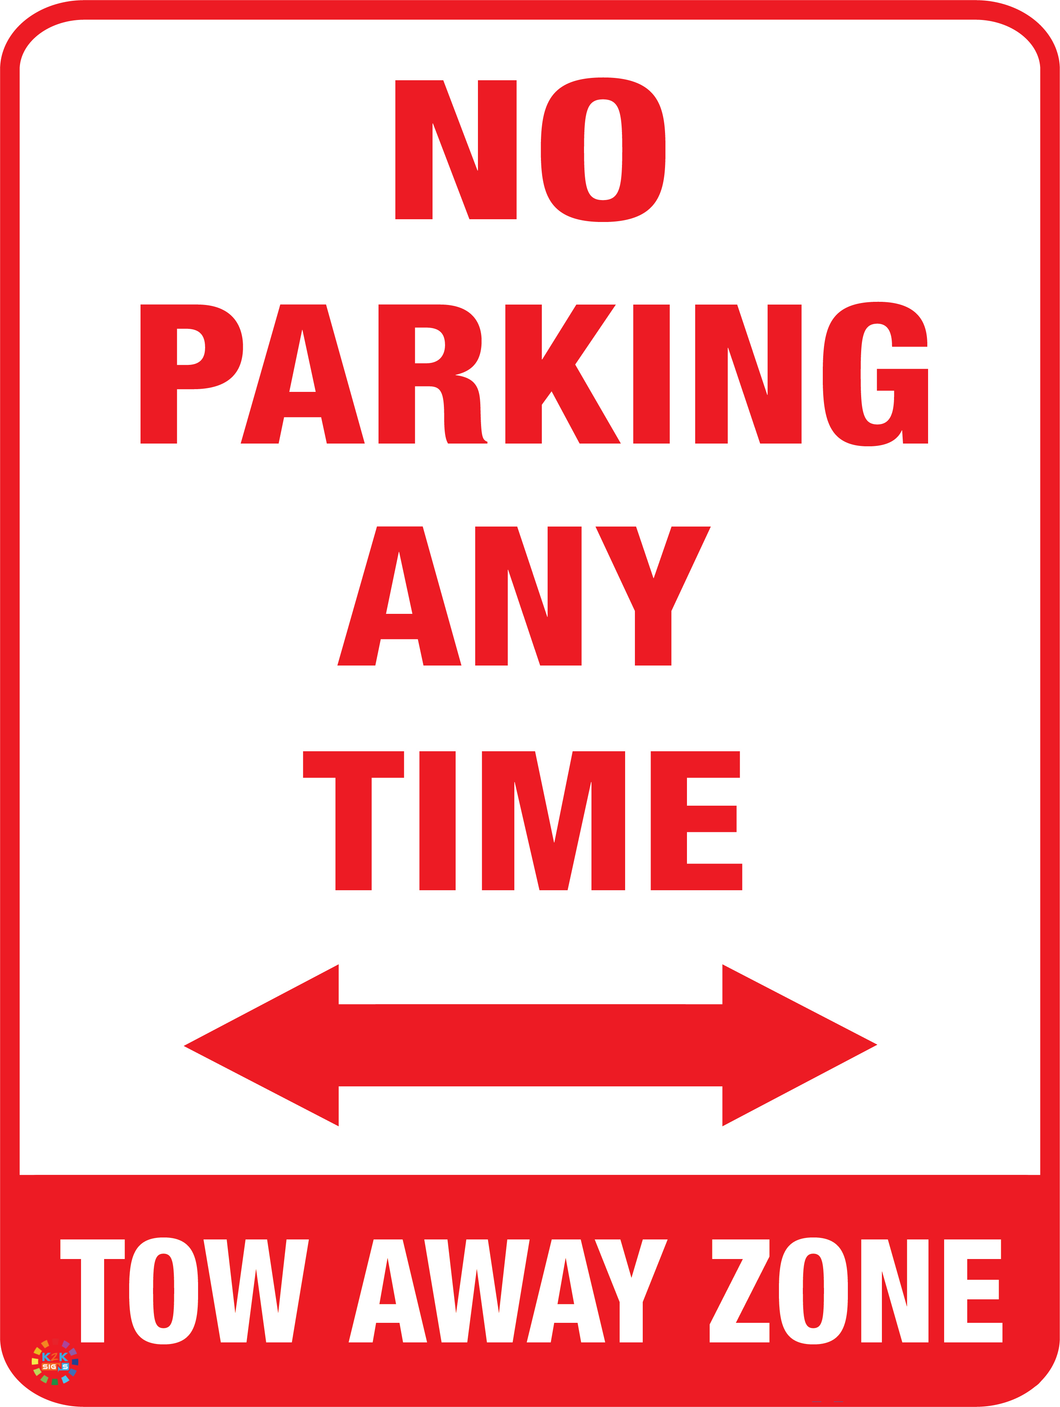 No Parking Any Time Tow Away Zone (Two Way Arrow) Sign